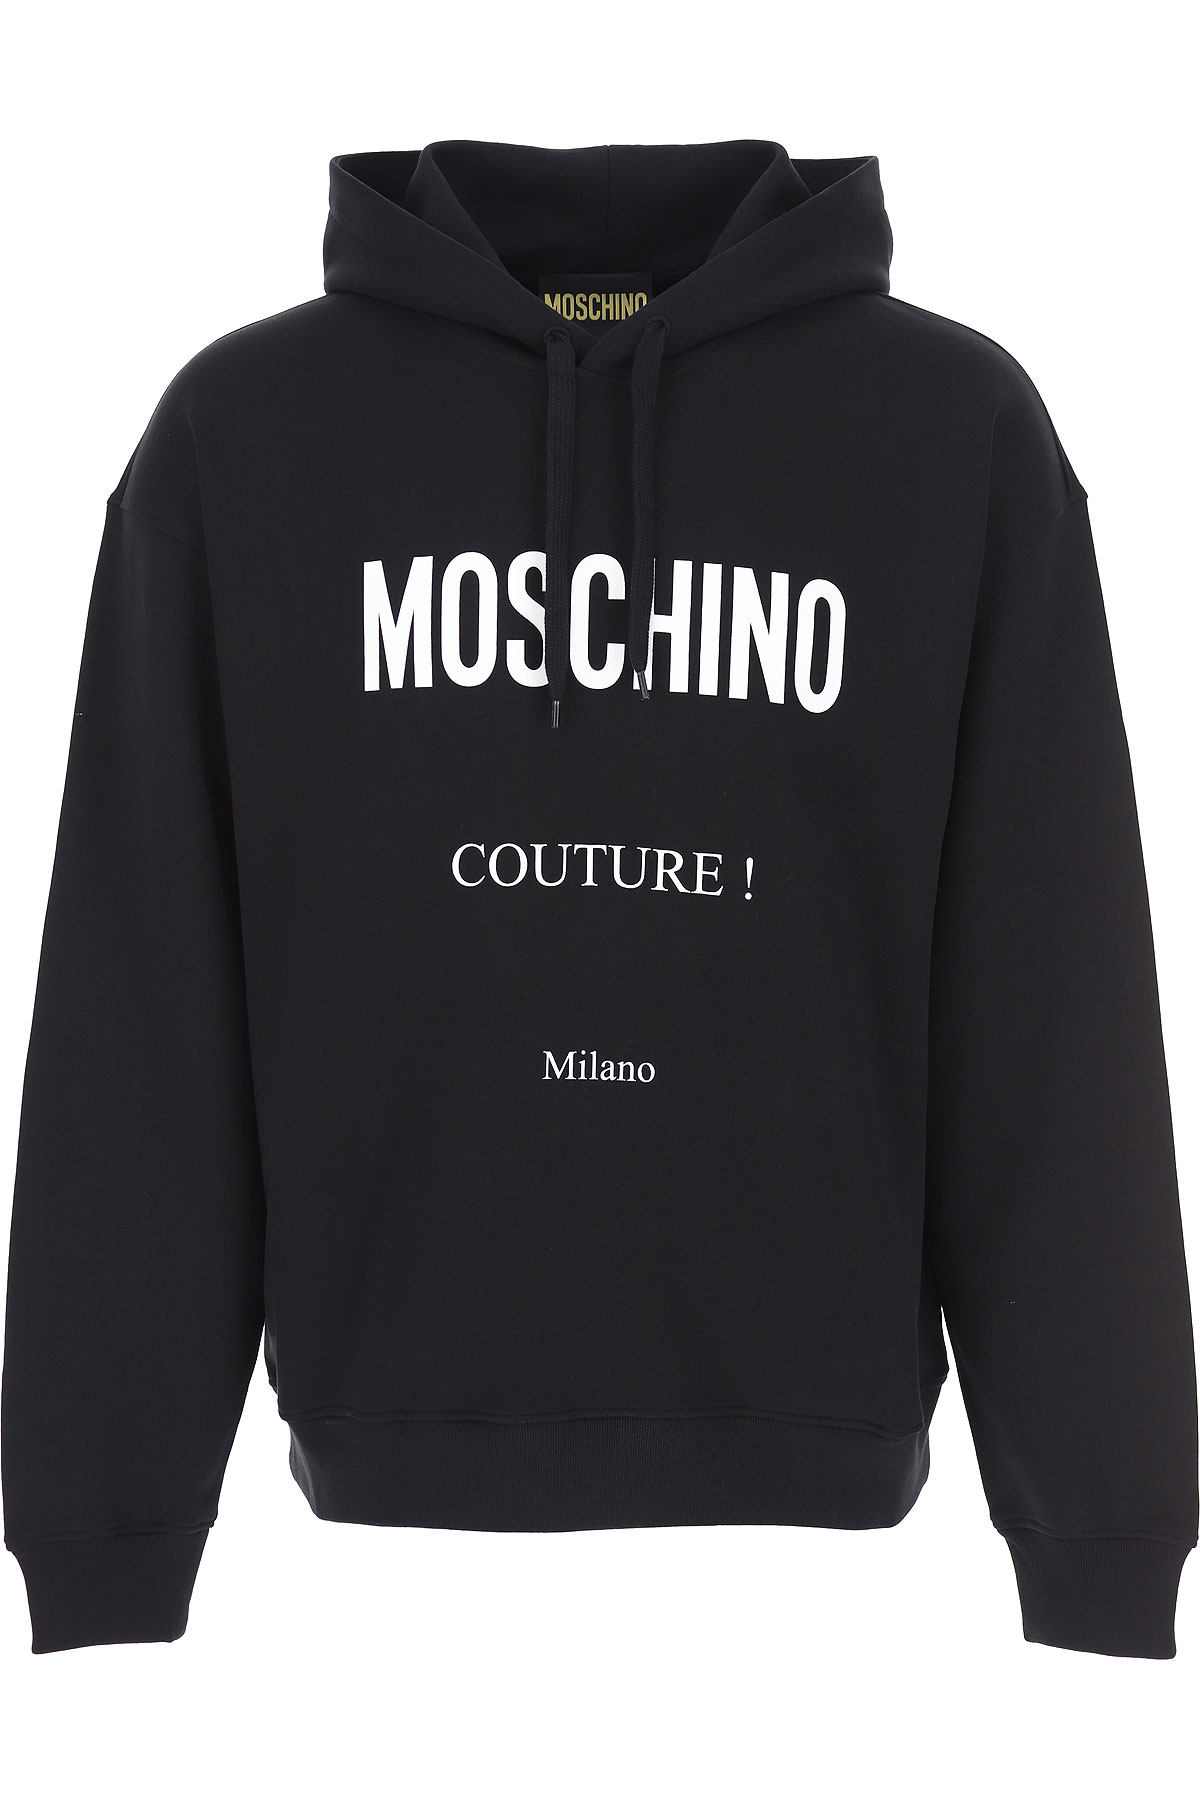 Mens Clothing Moschino, Style code: a1706-5228-1555